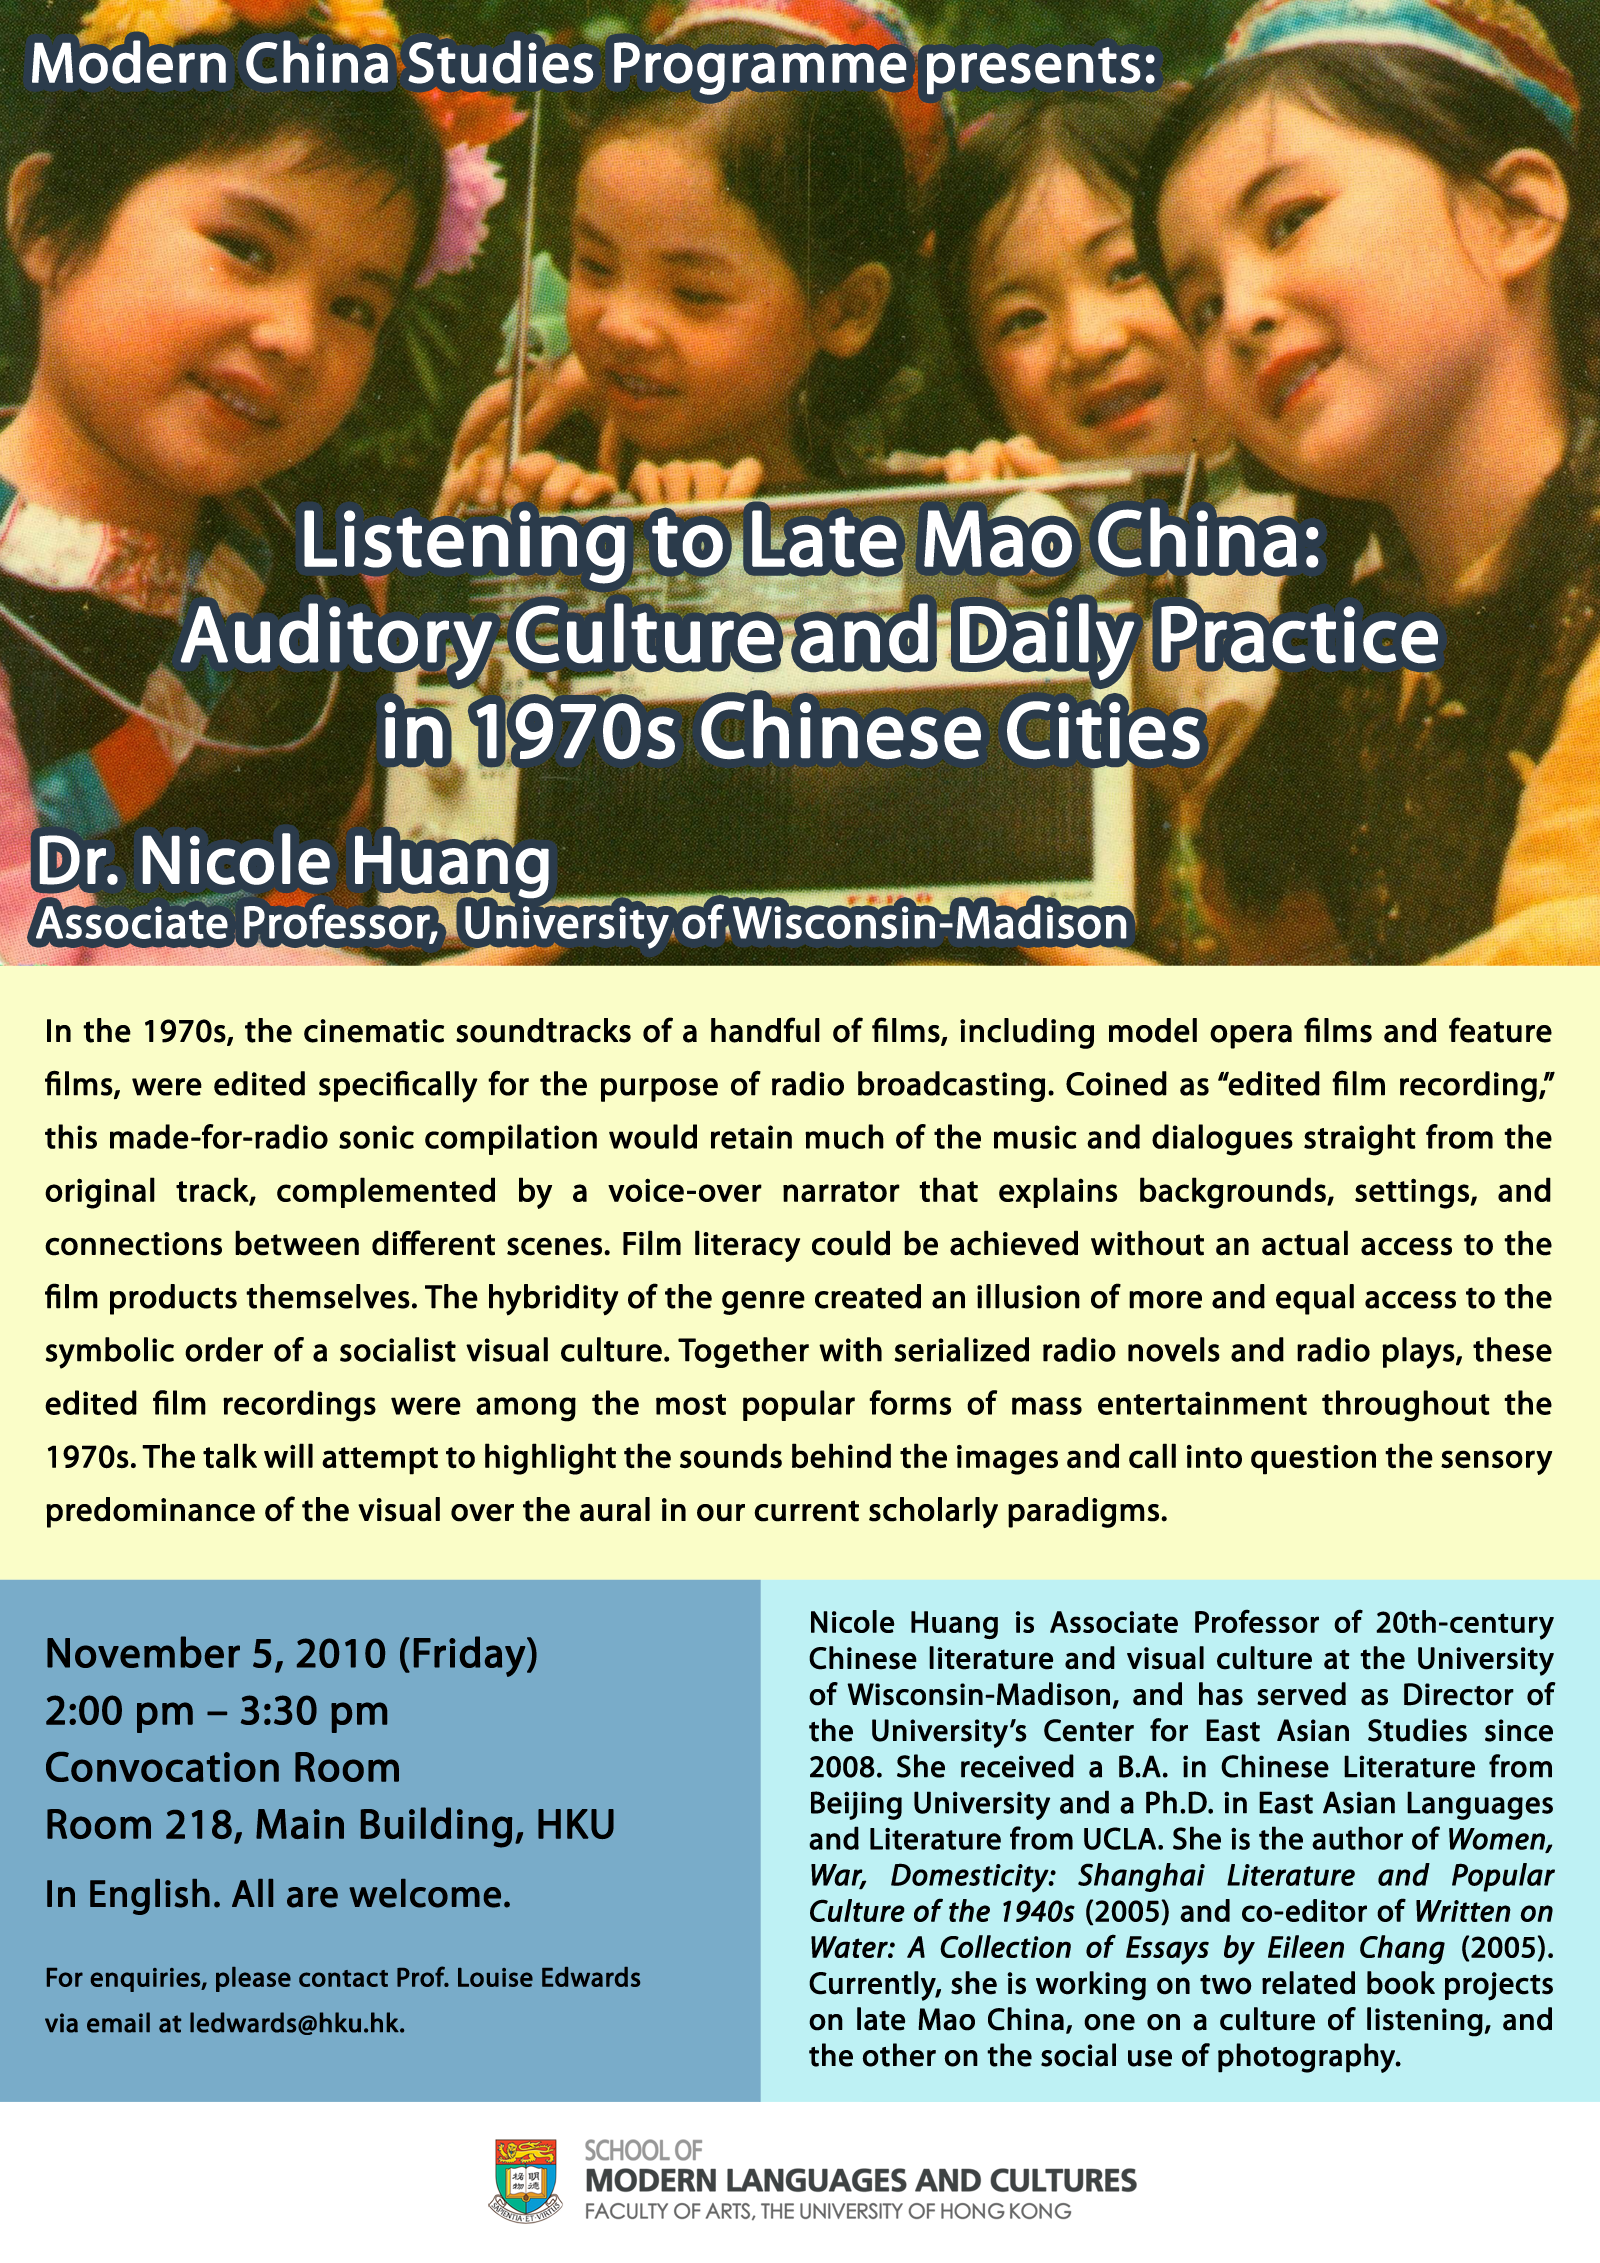 Talk: Listening to Late Mao China: Auditory Culture and Daily Practice in 1970s Chinese Cities